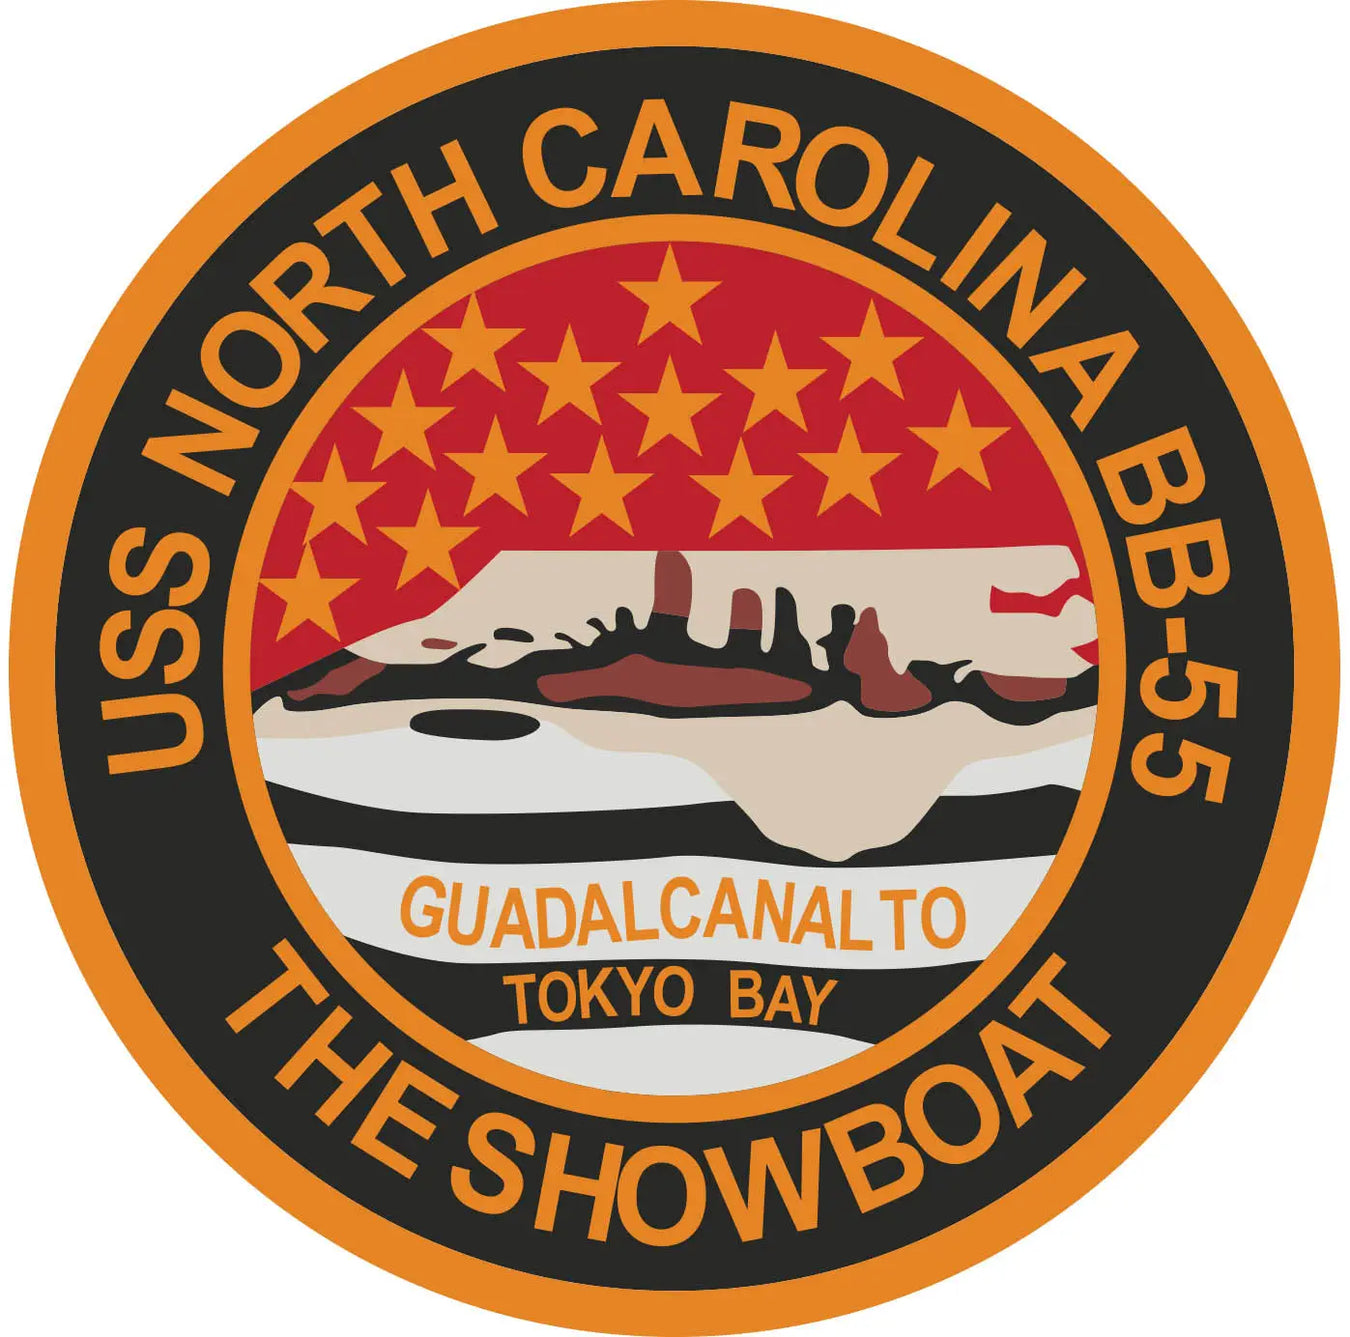 USS North Carolina (BB-55) Merchandise - Shop T-Shirts, hoodies, patches, pins, flags, decals, hats and more.